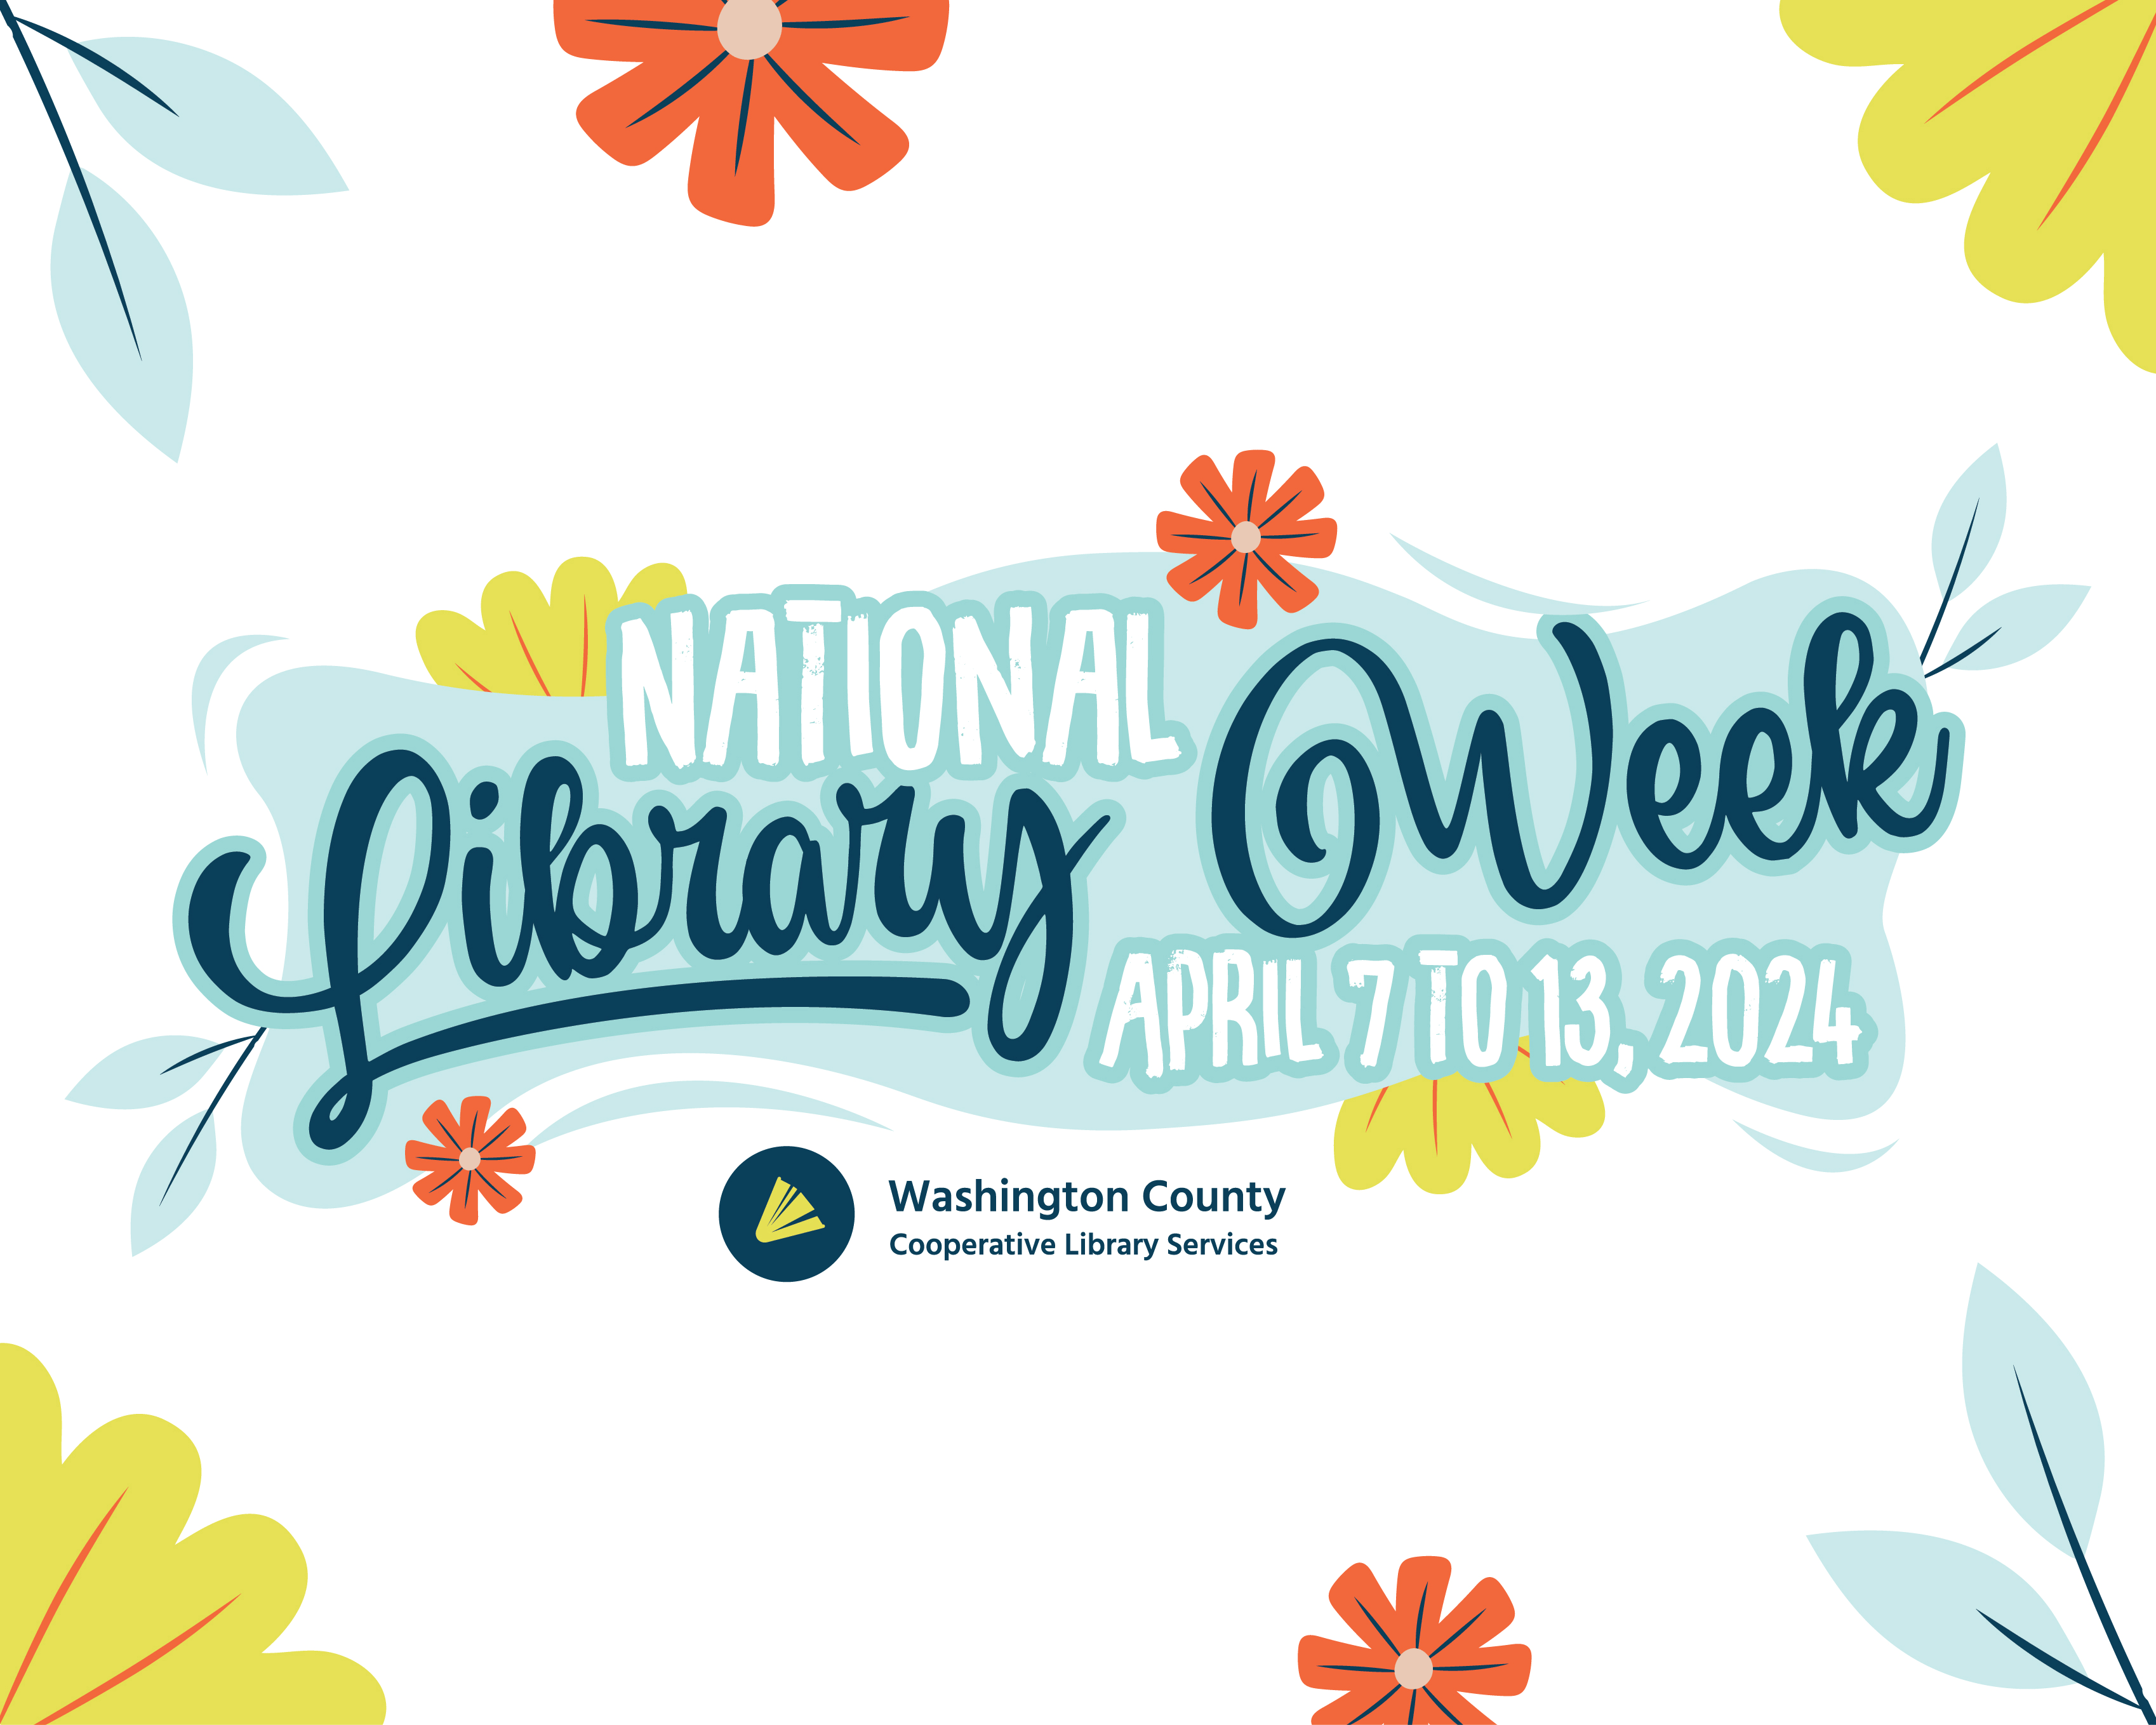 Banner image of National Library Week April 7 to 13, 2024 with flowers